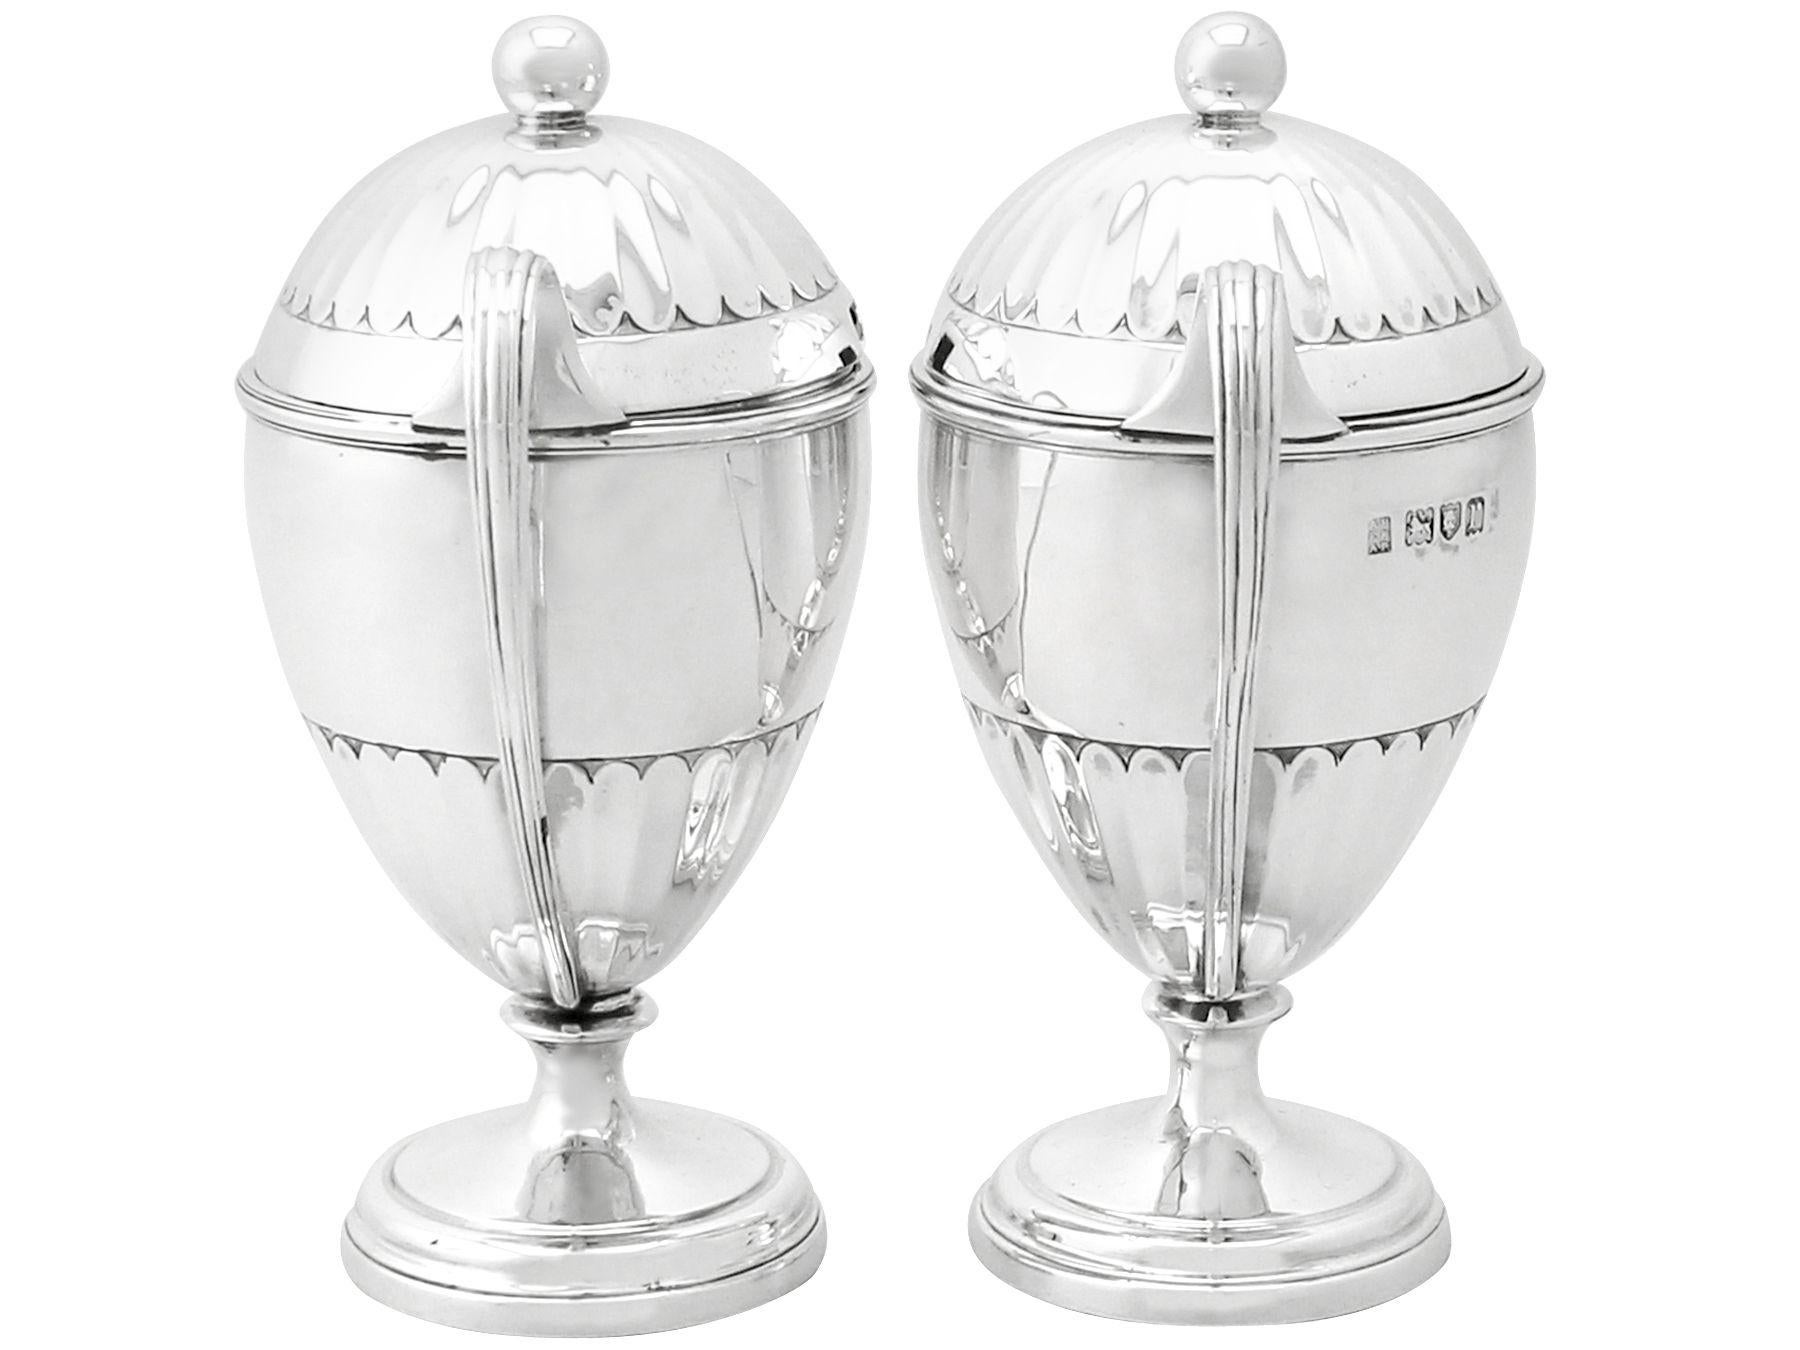 An exceptional, fine and impressive pair of antique George V English sterling silver preserve pots; an addition to our silver cruet and condiments collection.

These exceptional antique George V sterling silver preserve pots have a plain bell